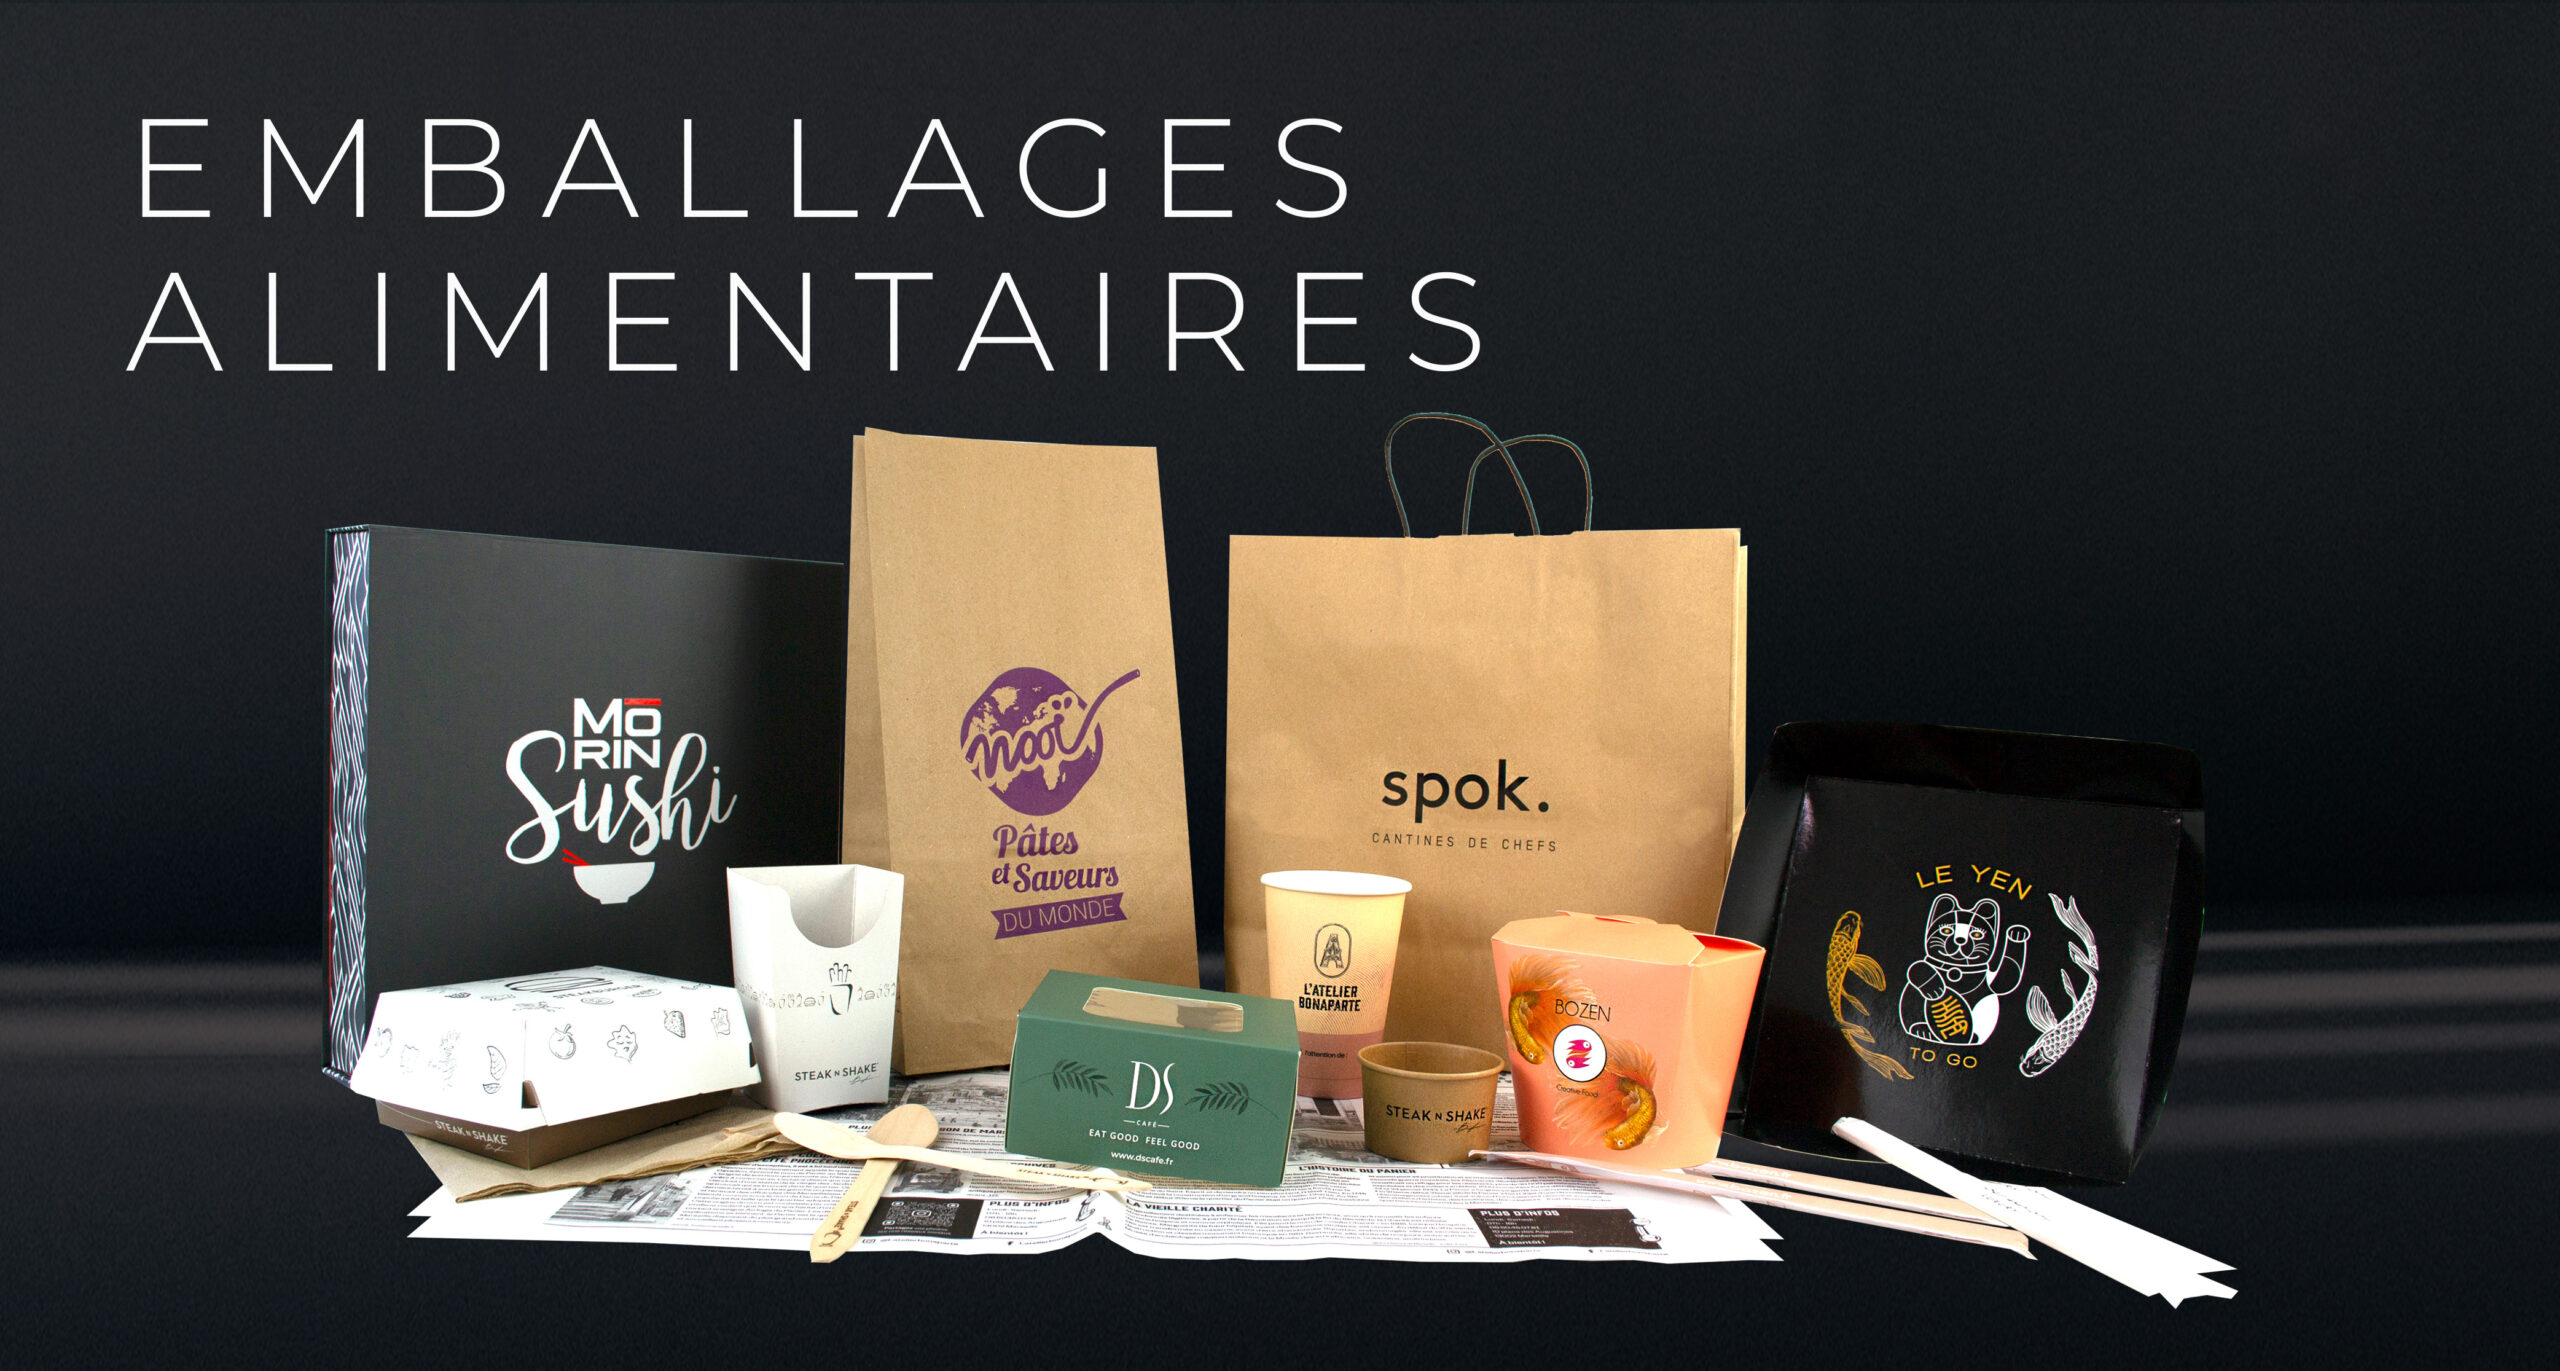 emballages-alimentaires-compo